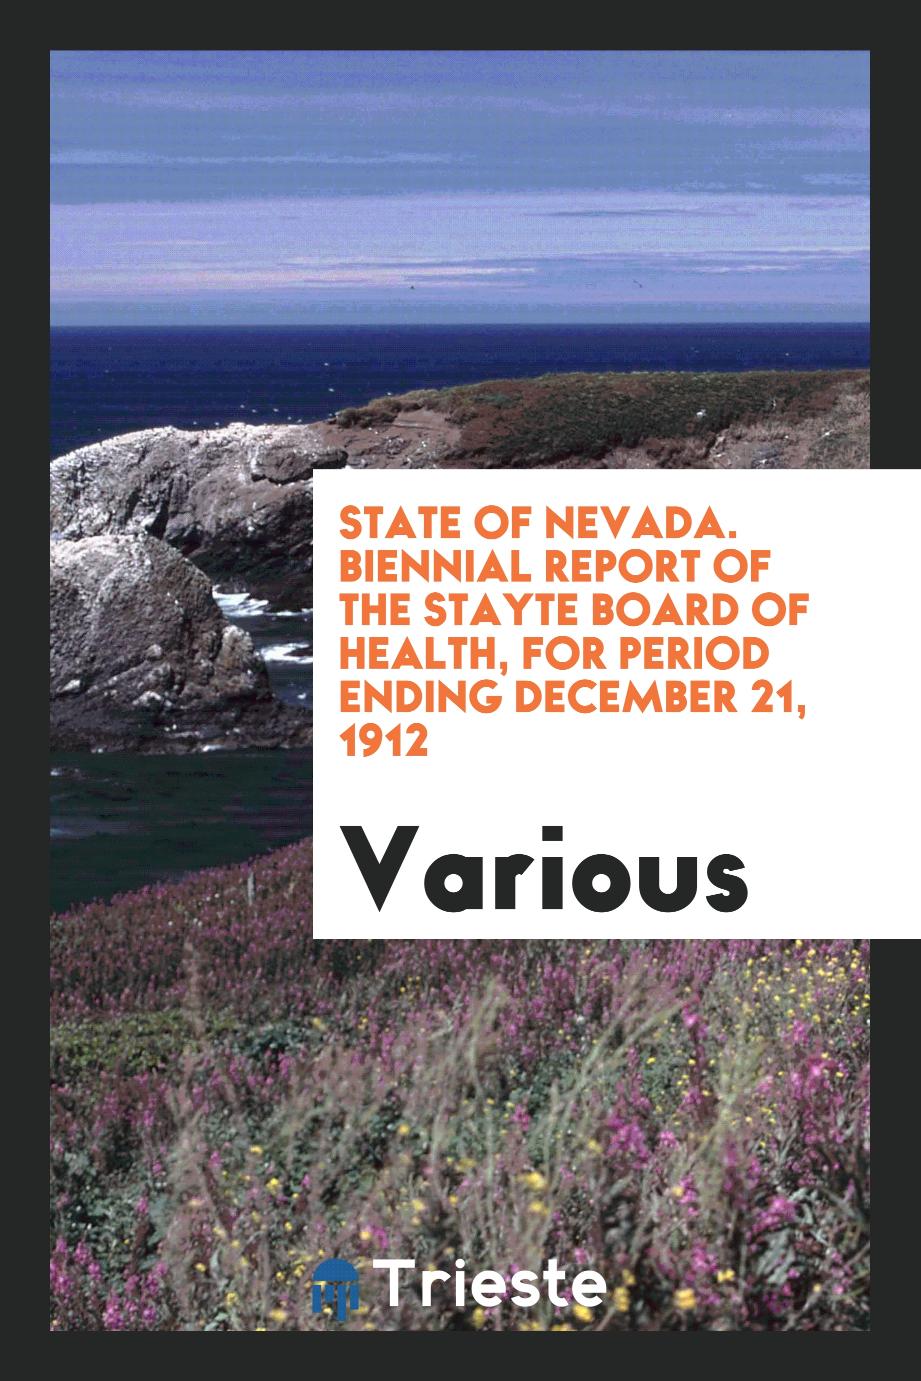 State of Nevada. Biennial Report of the Stayte board of health, for period ending December 21, 1912